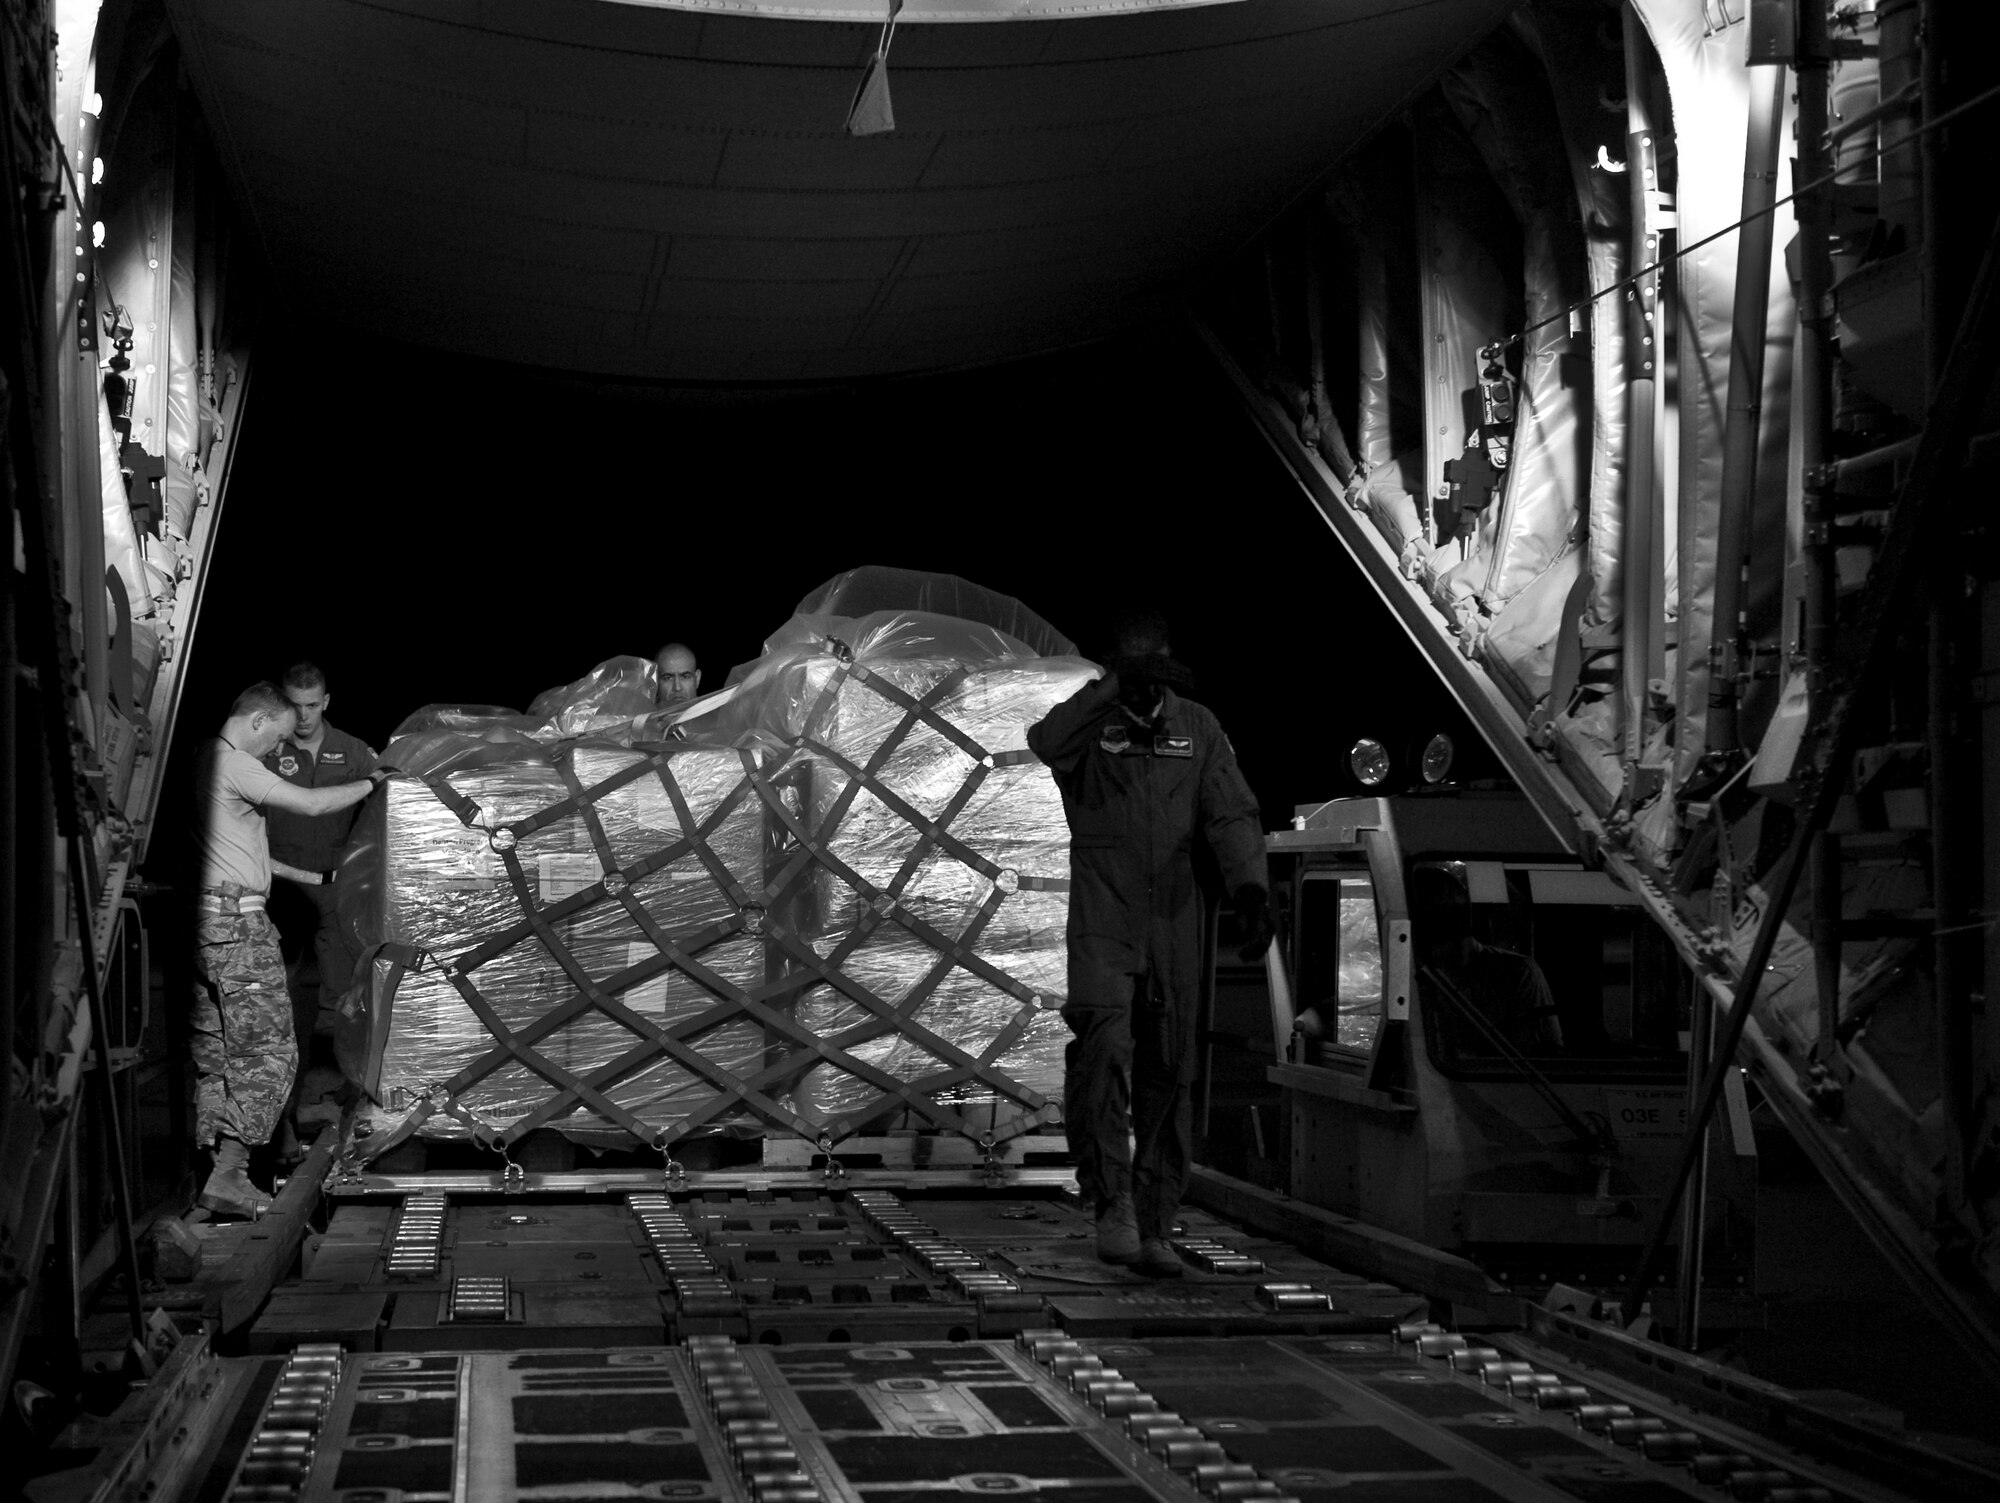 Airmen from the 317th Airlift Group (AG) load humanitarian supplies onto a C-130J in support of the Denton Program June 4, 2013, at Dyess Air Force Base, Texas. The Denton Amendment allows U.S. military aircraft to transport, on a space-available basis, humanitarian supplies from non-government organizations to people around the world who are in need of assistance. The 317th AG transported the supplies to Pope Army Airfield, N.C., where it will be taken to Joint Base Charleston Air Base, S.C., and then to Afghanistan. The supplies were donated by Global Samaritan Resources. (U.S. Air Force photo by Senior Airman Jonathan Stefanko/Released)